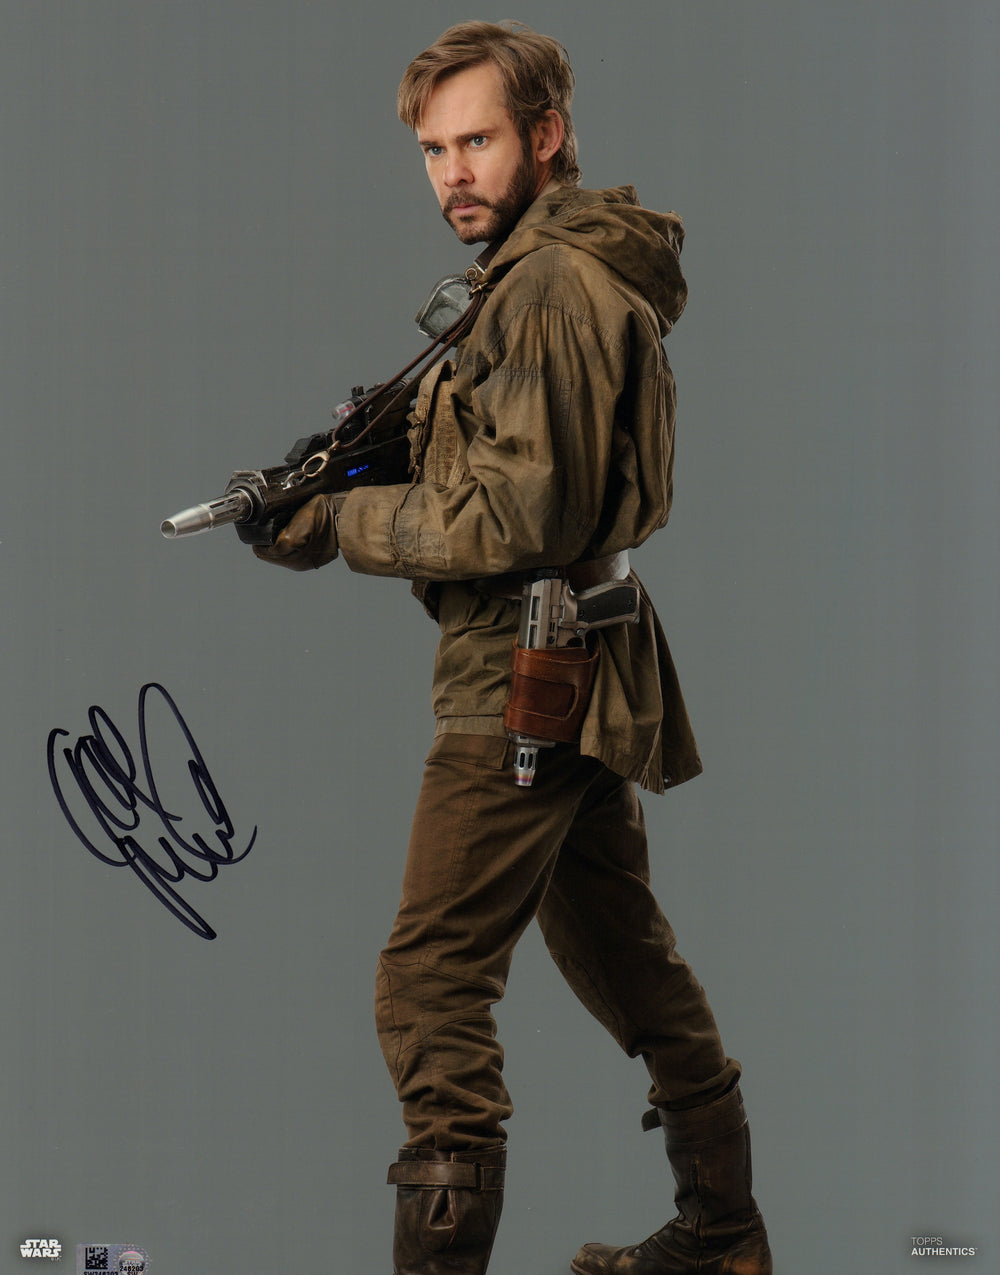 Dominic Monaghan as Beaumont Kin from Star Wars: The Rise of Skywalker (Topps Authentics) Signed 11x14 Photo